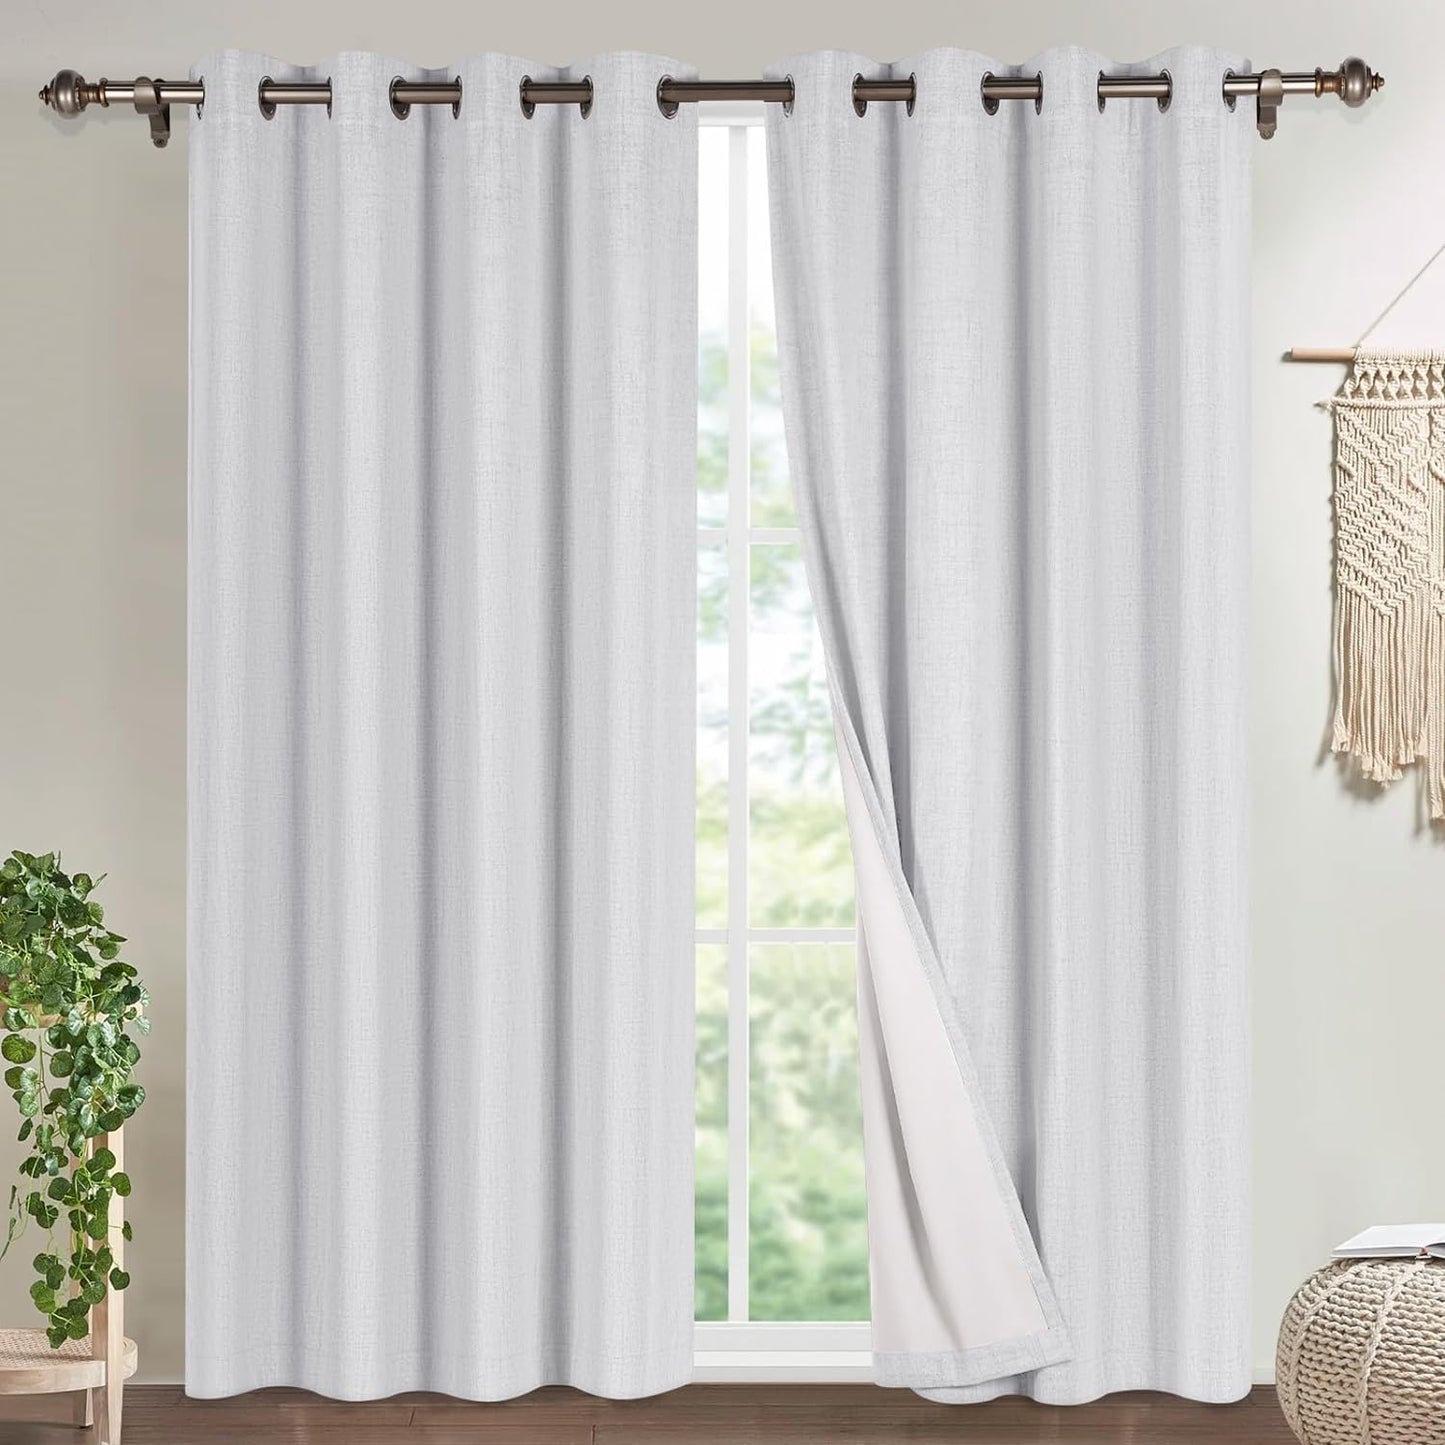 Timeles 100% Blackout Window Curtains 84 Inch Length for Living Room Textured Linen Curtains Sliver Grommet Pinch Pleated Room Darkening Curtain with White Liner/Ties(2 Panel W52 X L84, Ivory)  Timeles Ivory W52" X L96" 